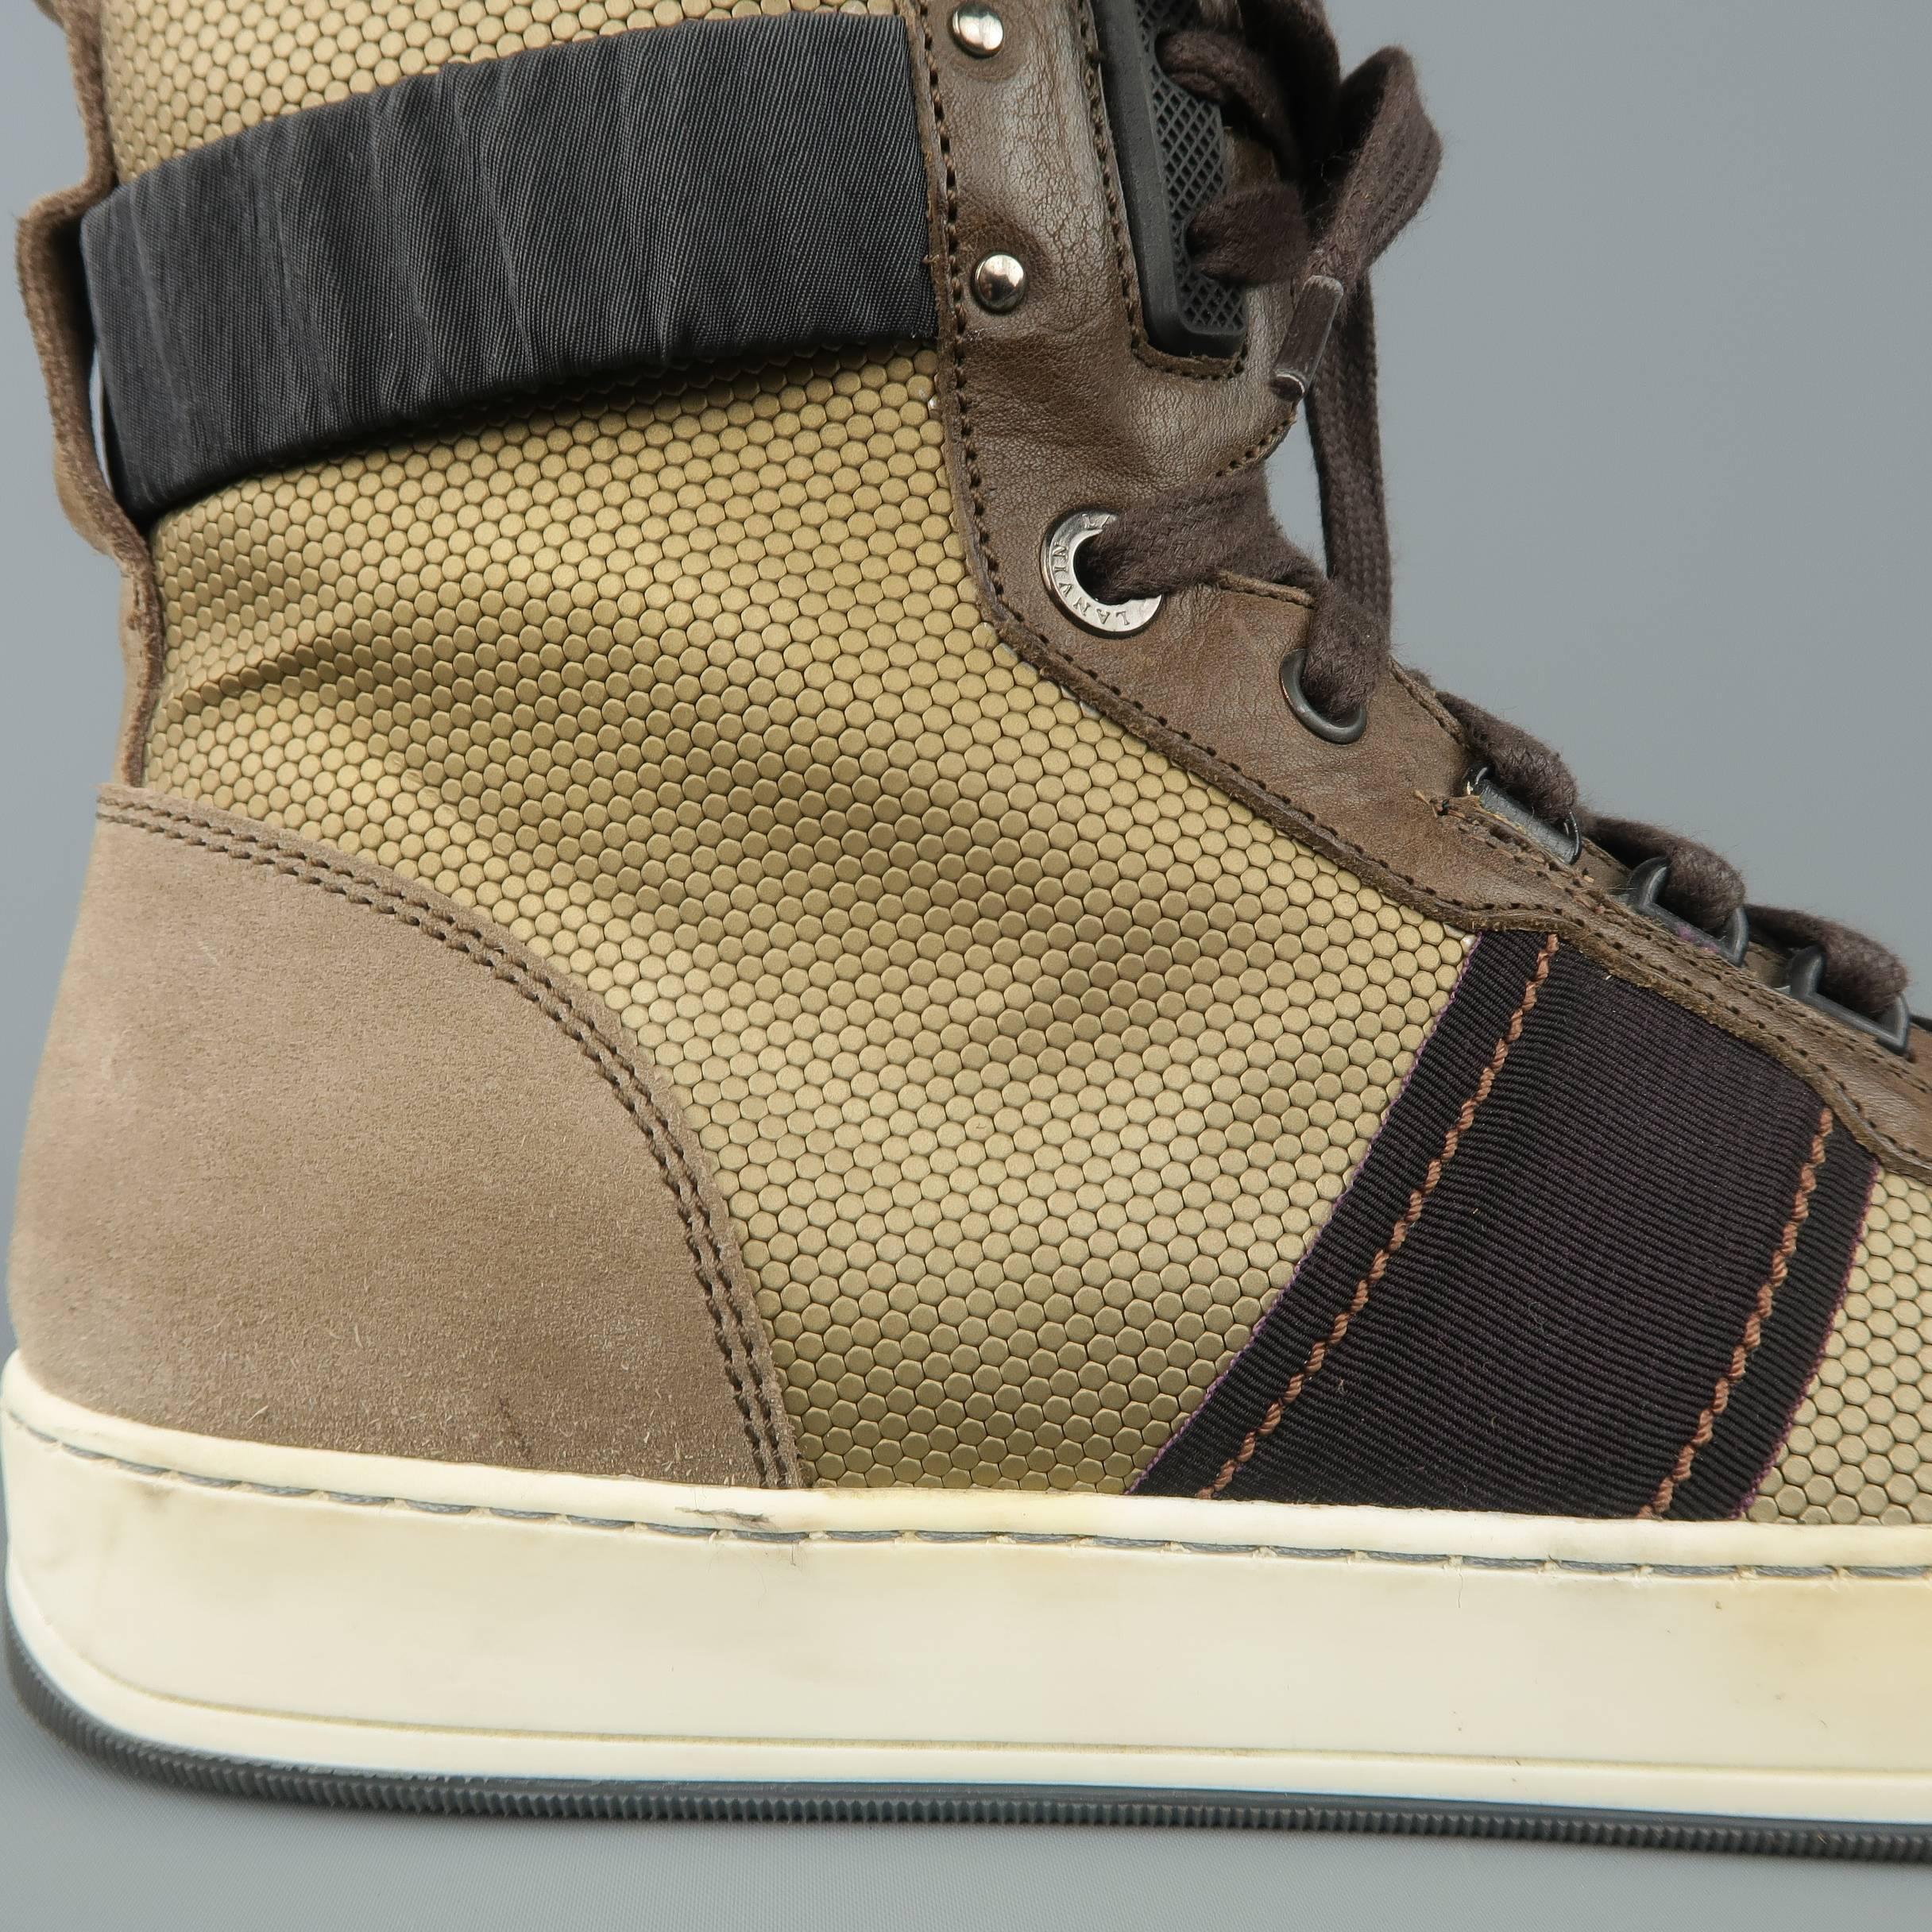 LANVIN high top sneakers come in a metallic dark gold textured fabric with taupe suede and leather details, elastic ankle cuff, and two tone sole. Wear throughout and yellowing of sole. As-is. Made in Italy.
 
Fair Pre-Owned Condition.
Marked: UK 8
